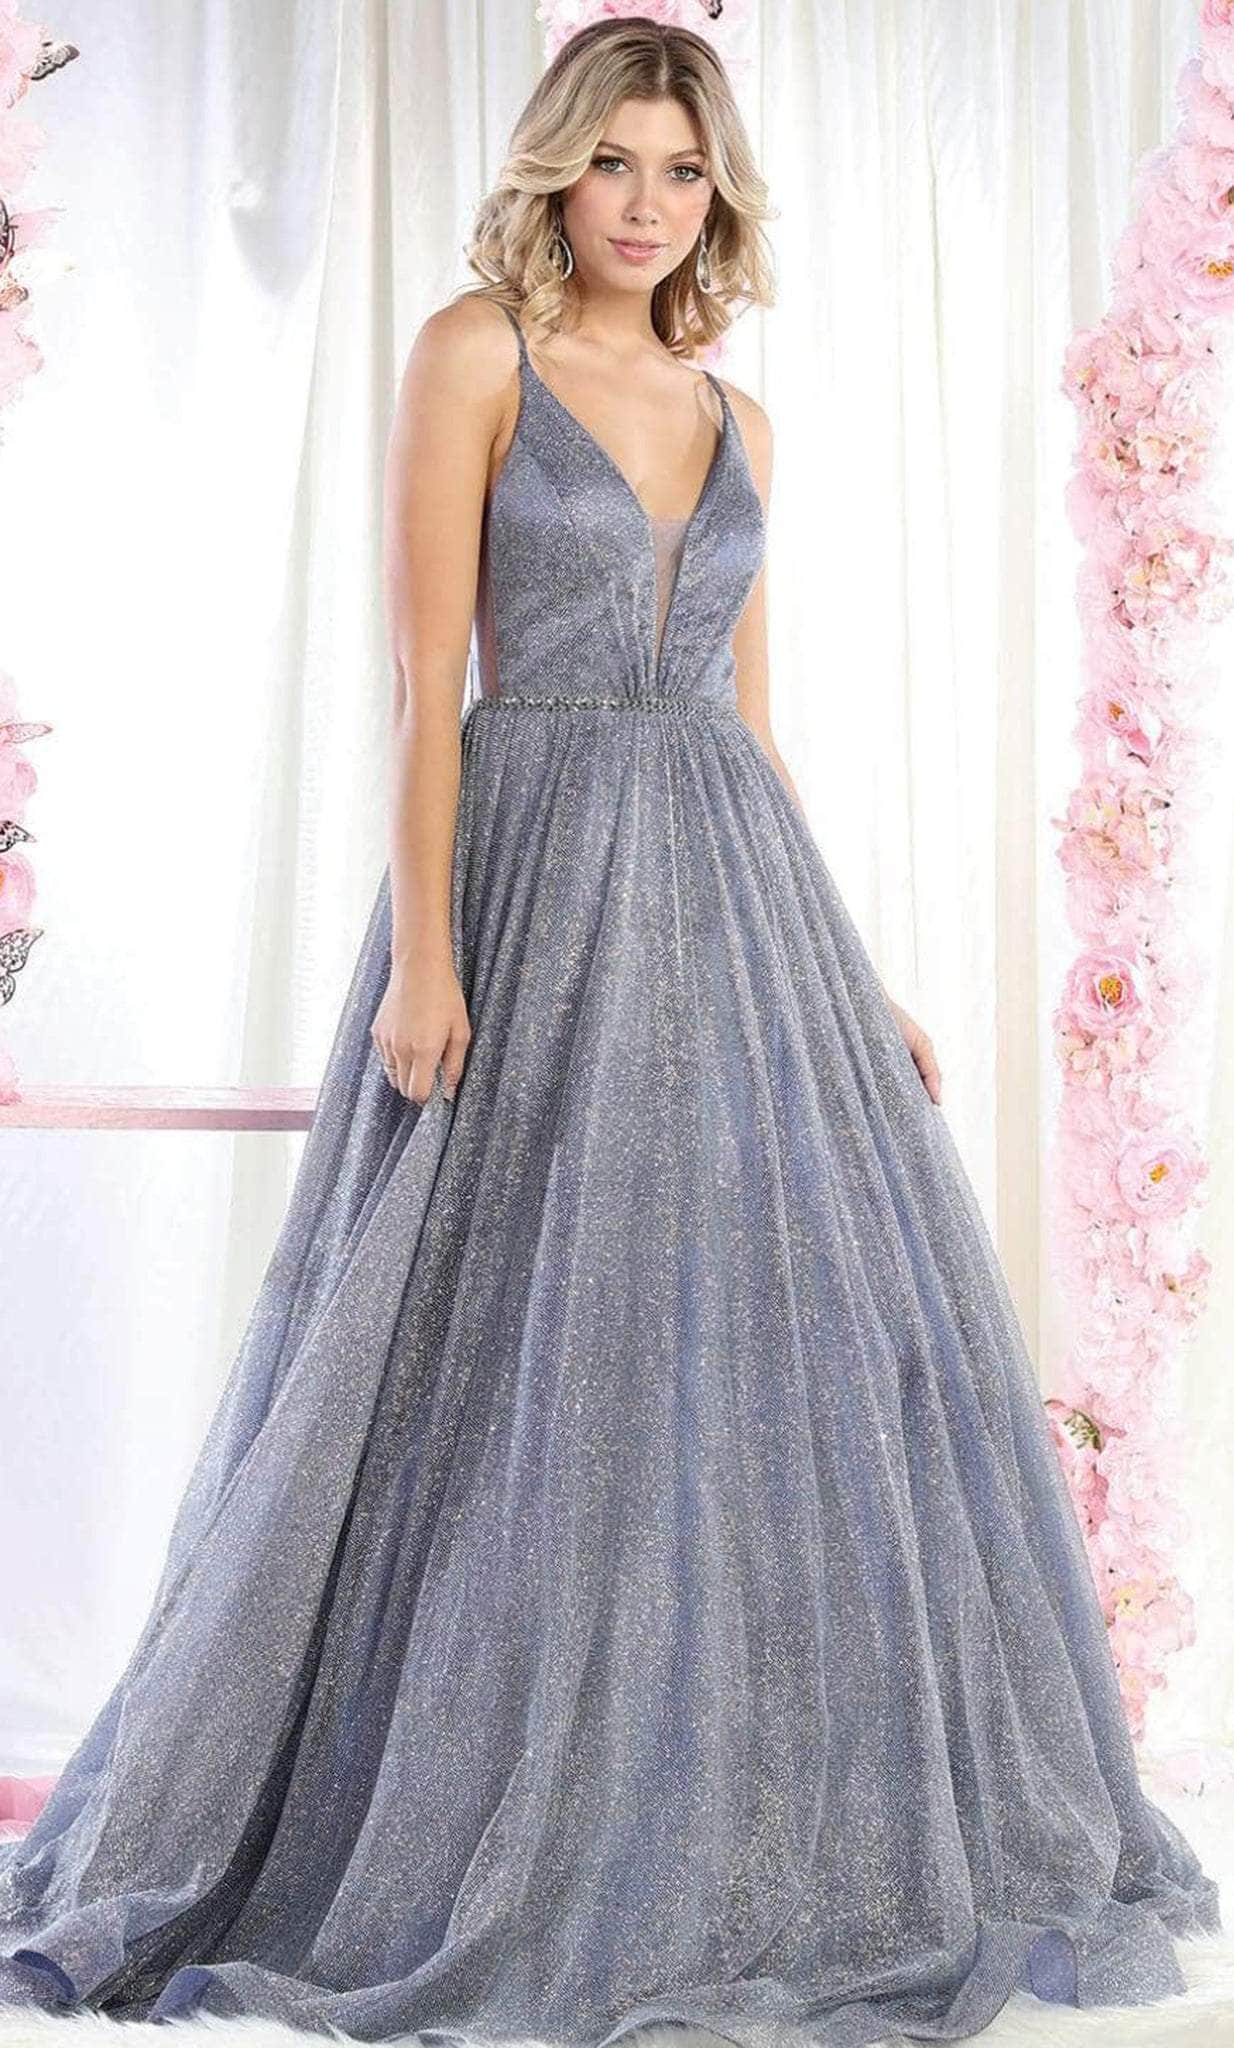 May Queen RQ7983 - Sleeveless V Neck A Line Dress Prom Dresses 4 / Dustyblue